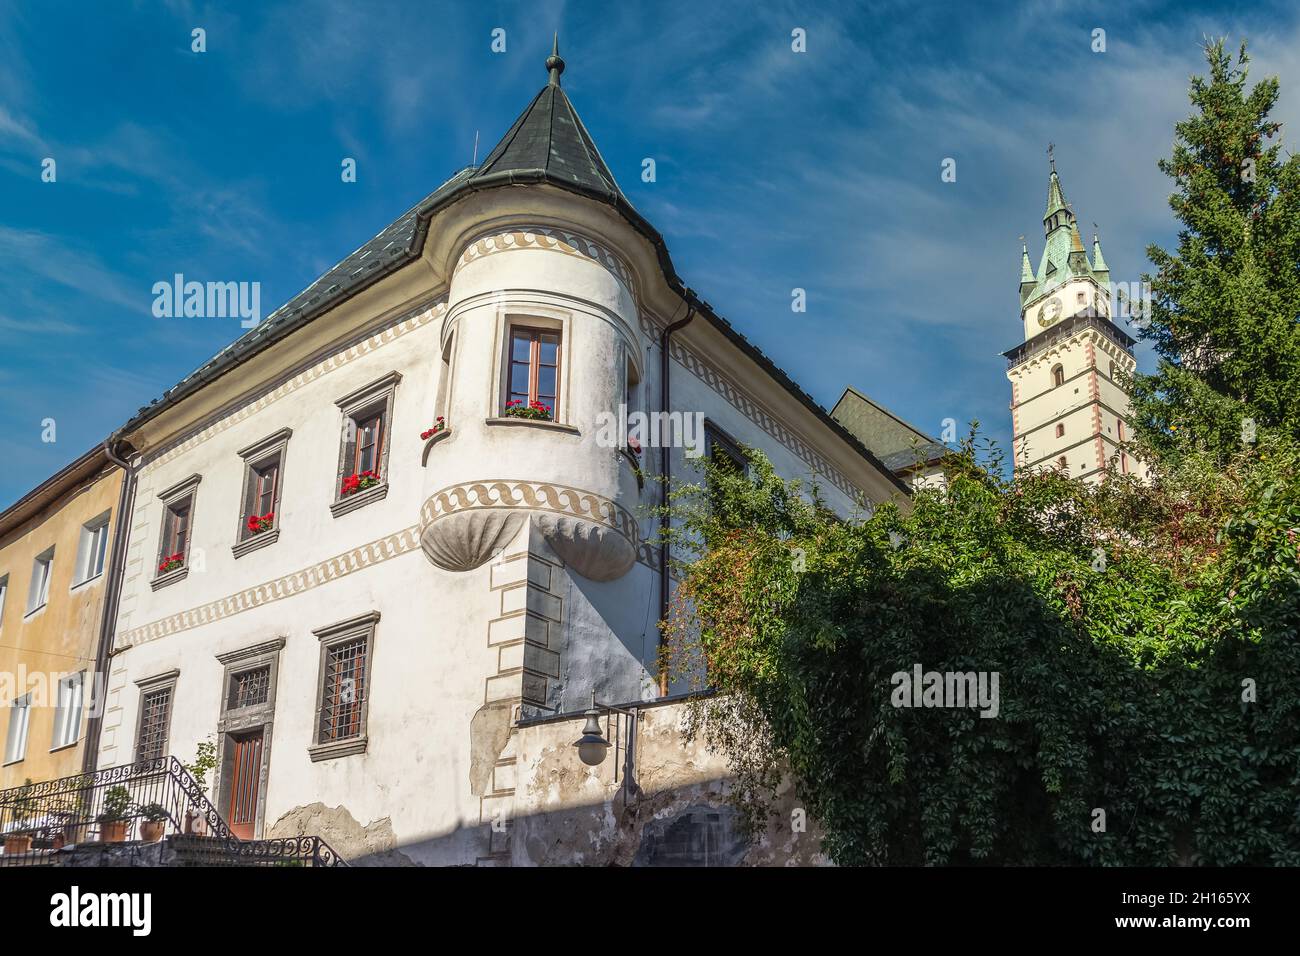 Renaissance mansion in Kremnica with turret like tower in the city of gold in Slovakia with imposing castle church bell tower in the background Stock Photo